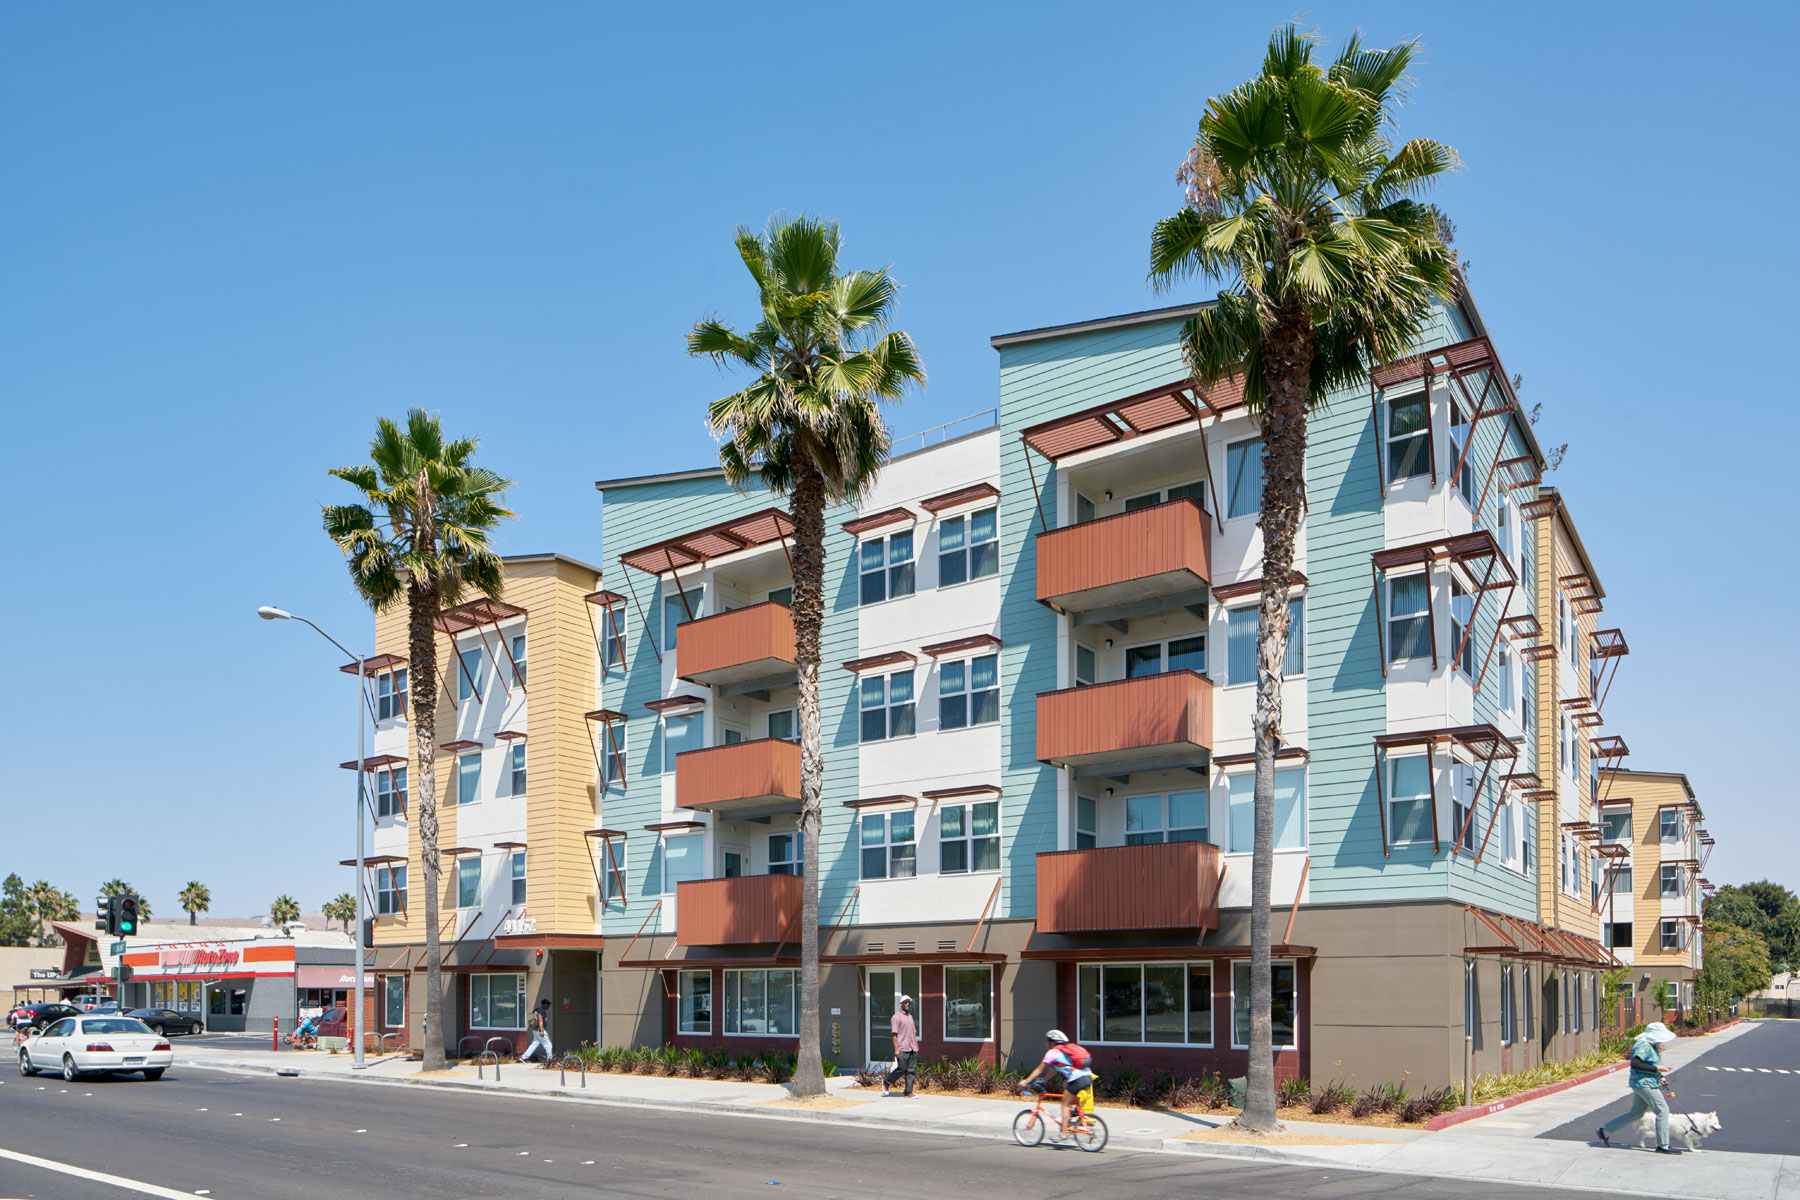 Laguna Commons in the San Francisco Bay Area is located at Fremont’s historic Five Corners area, and provides affordable housing and supportive services for formerly homeless families and veterans.